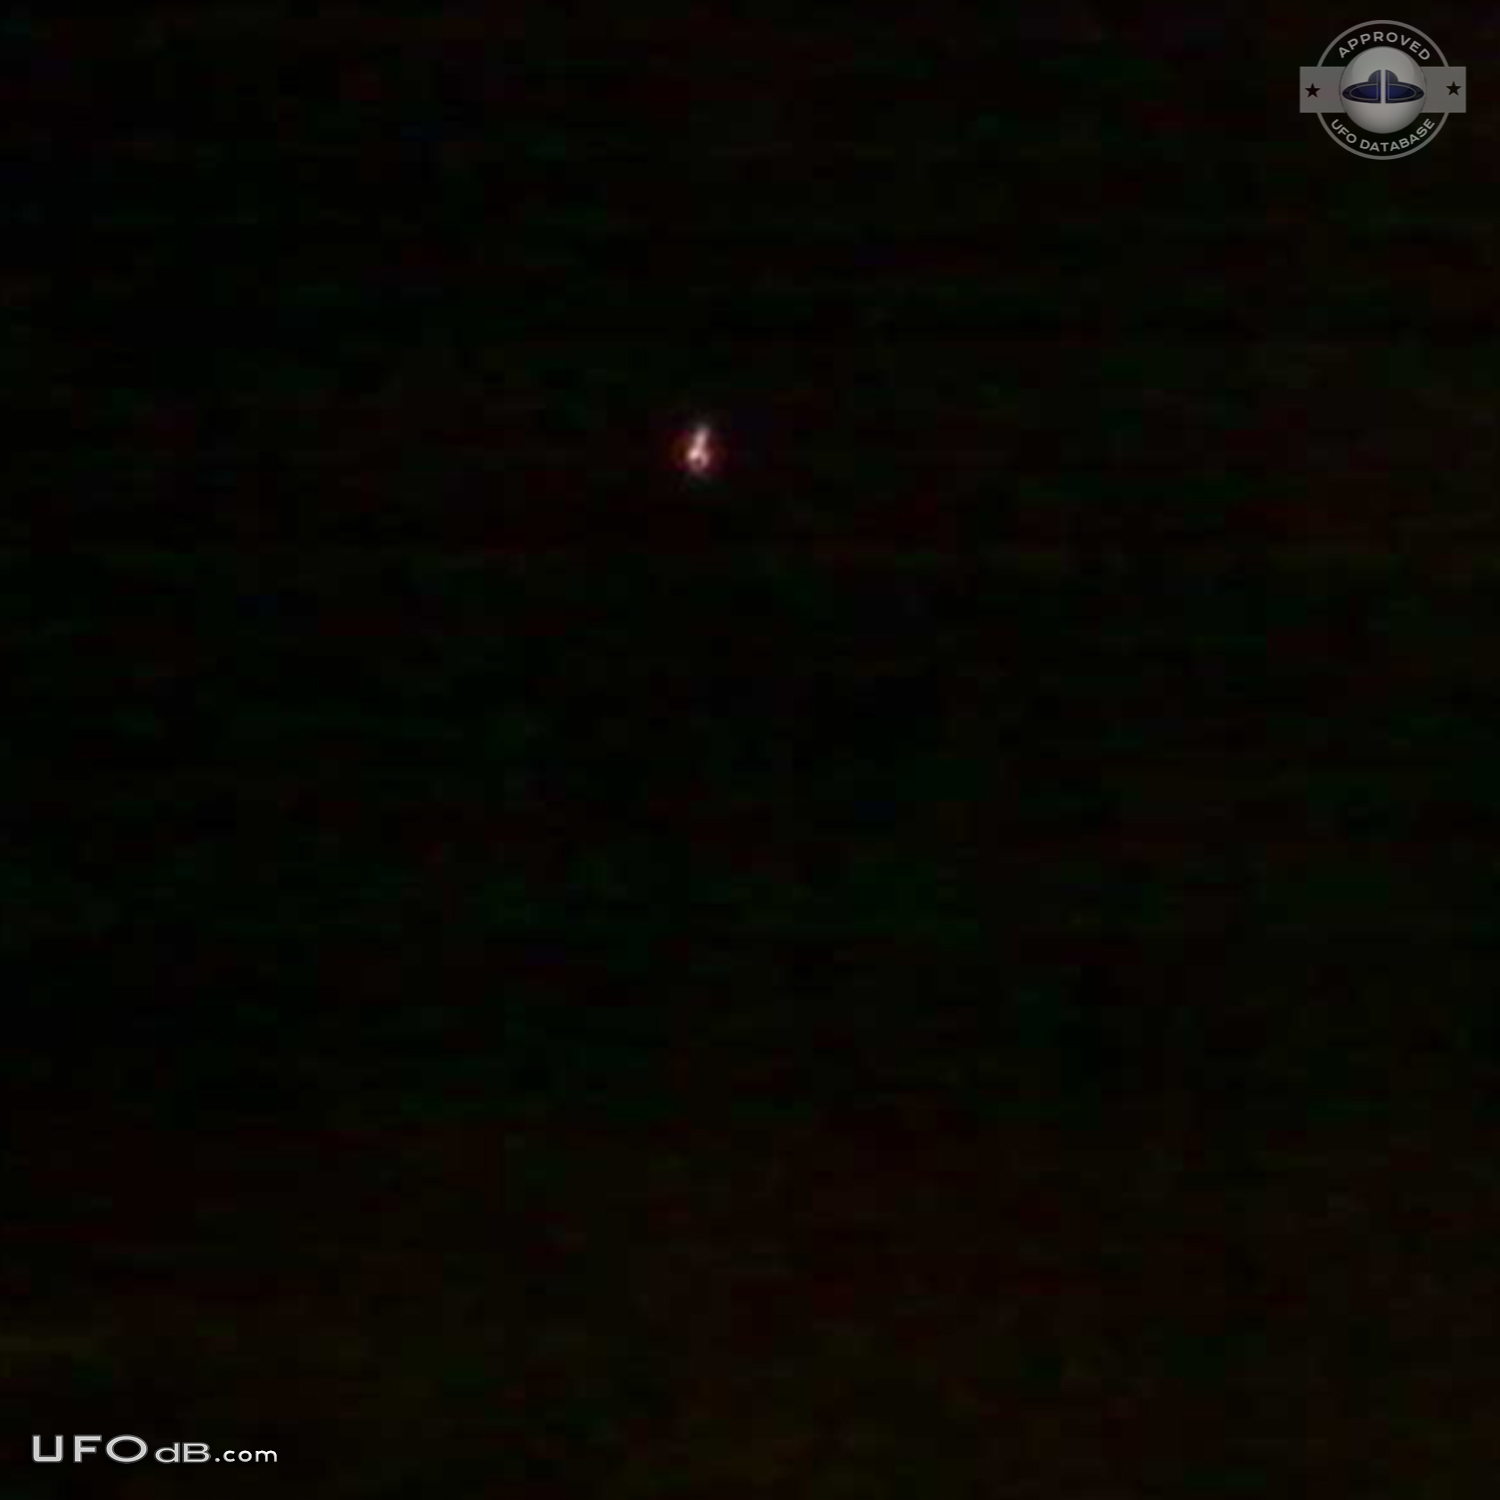 Huge red ball UFO seen by a group of people in West Allis, Wisconsin UFO Picture #375-3